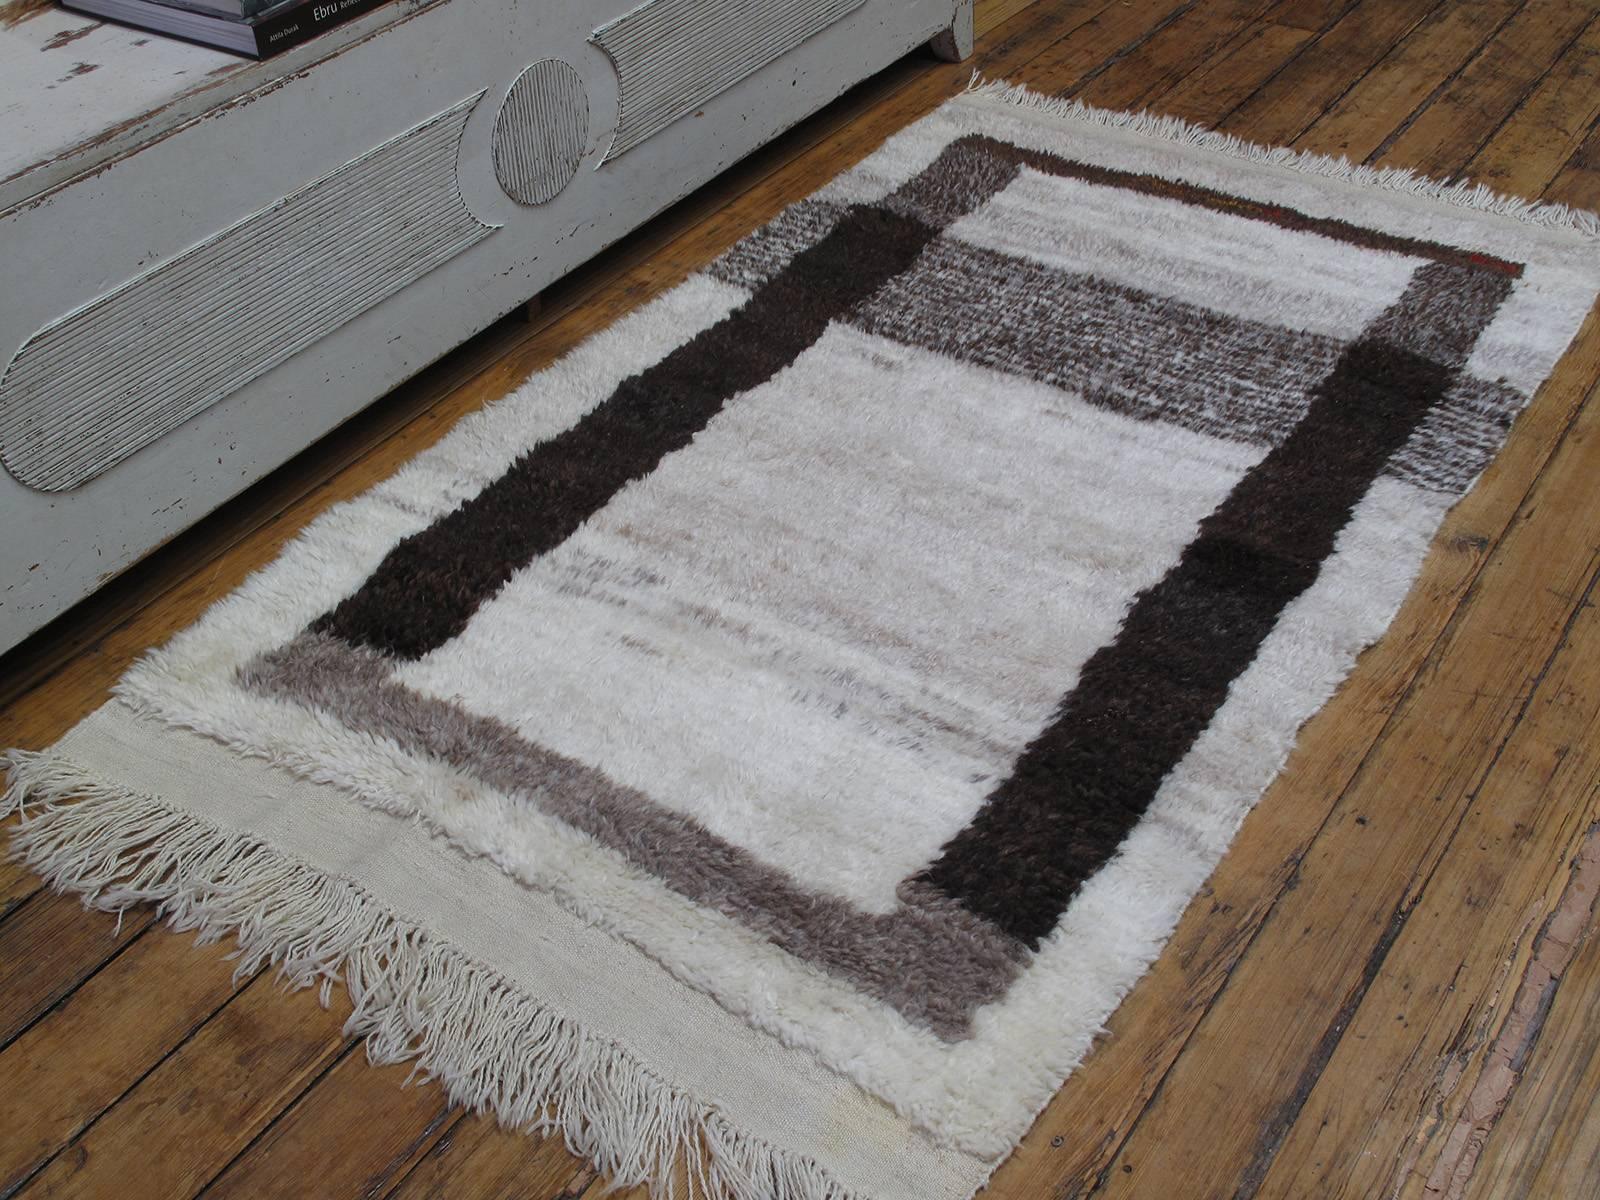 A small shaggy village rug from Central Turkey, woven with hand-spun wool in natural ivory and browns, creating a unique graphic image.